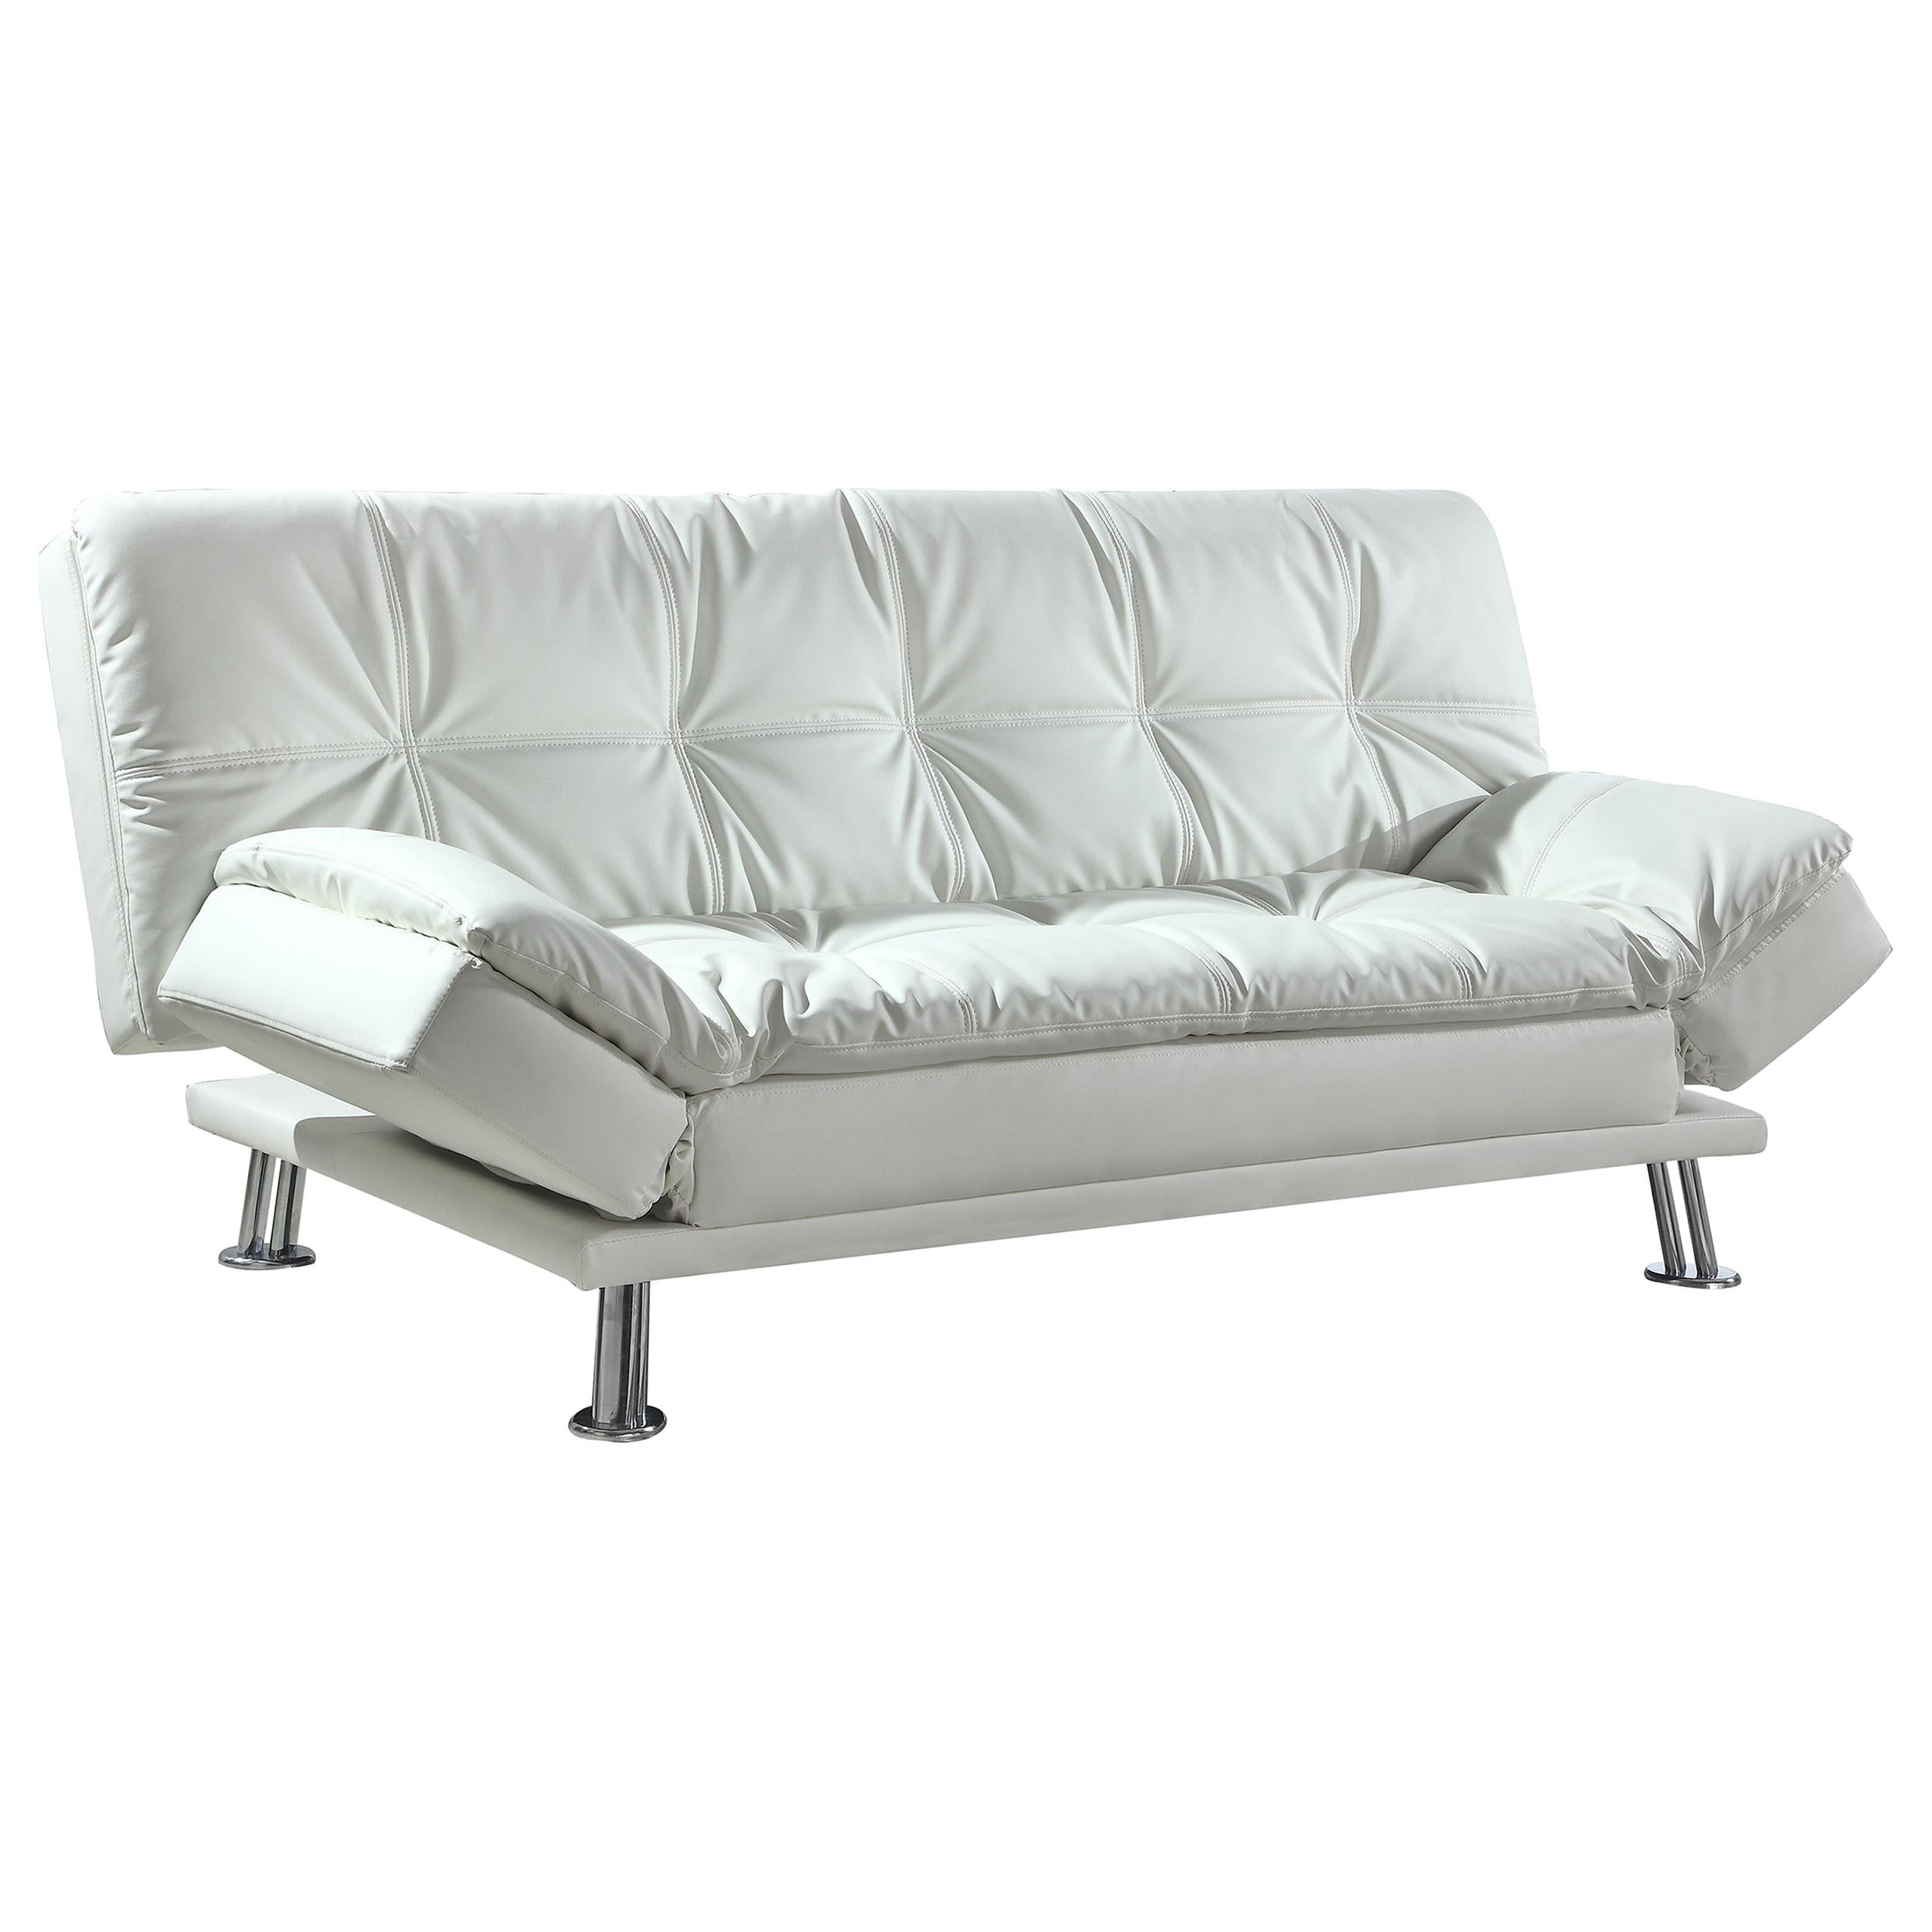 Dilleston Tufted Back Upholstered Sofa Bed - Luxury Home Furniture (MI)